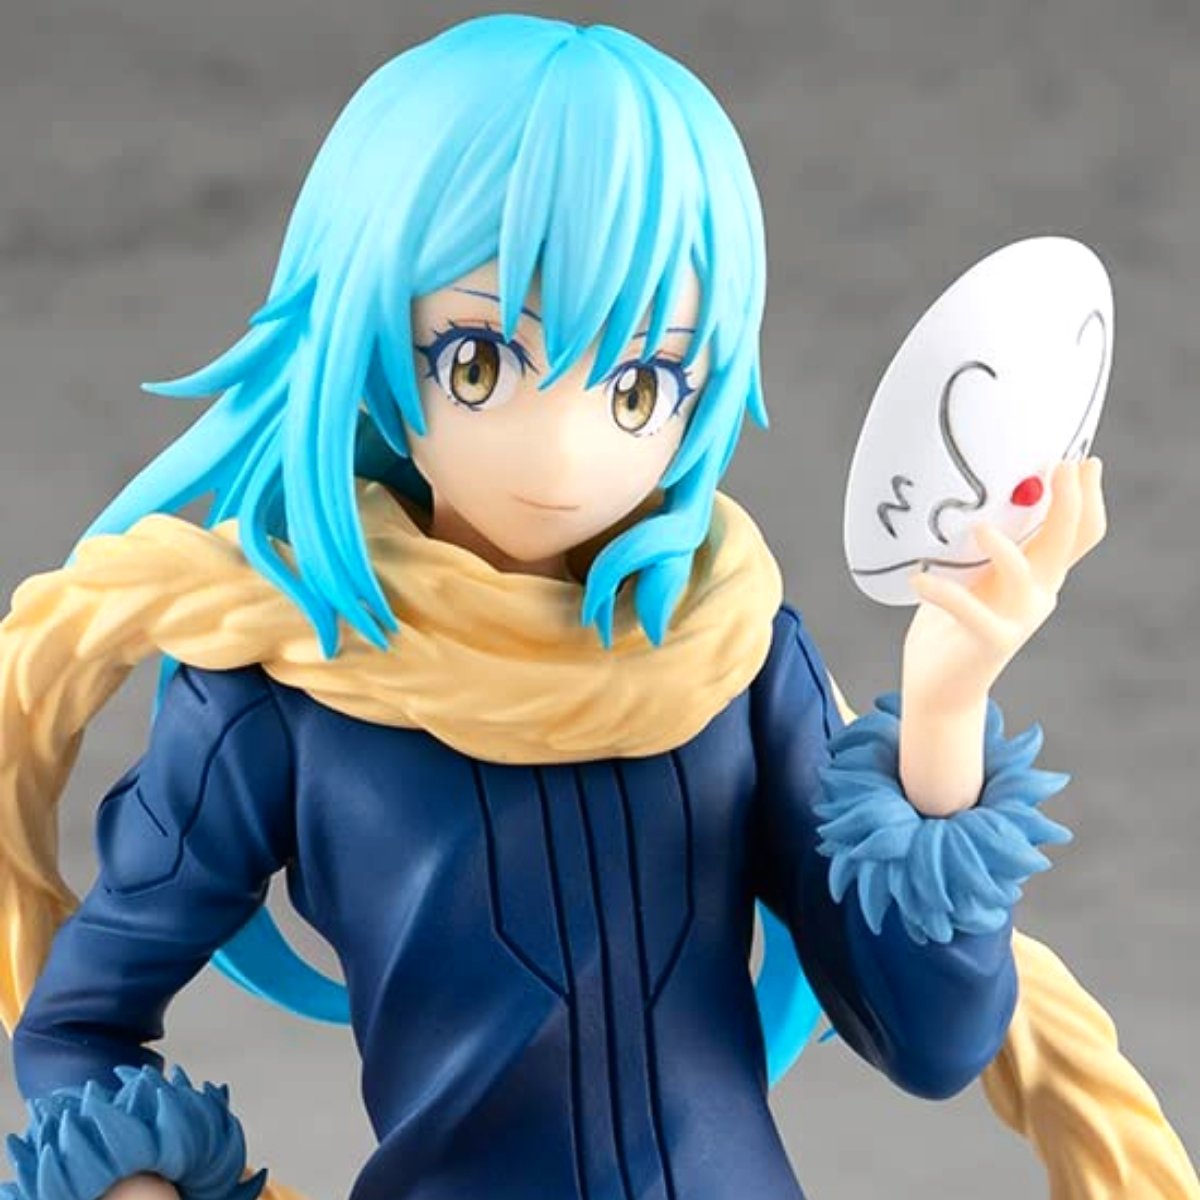 That Time I Got Reincarnated as a Slime figures and goods